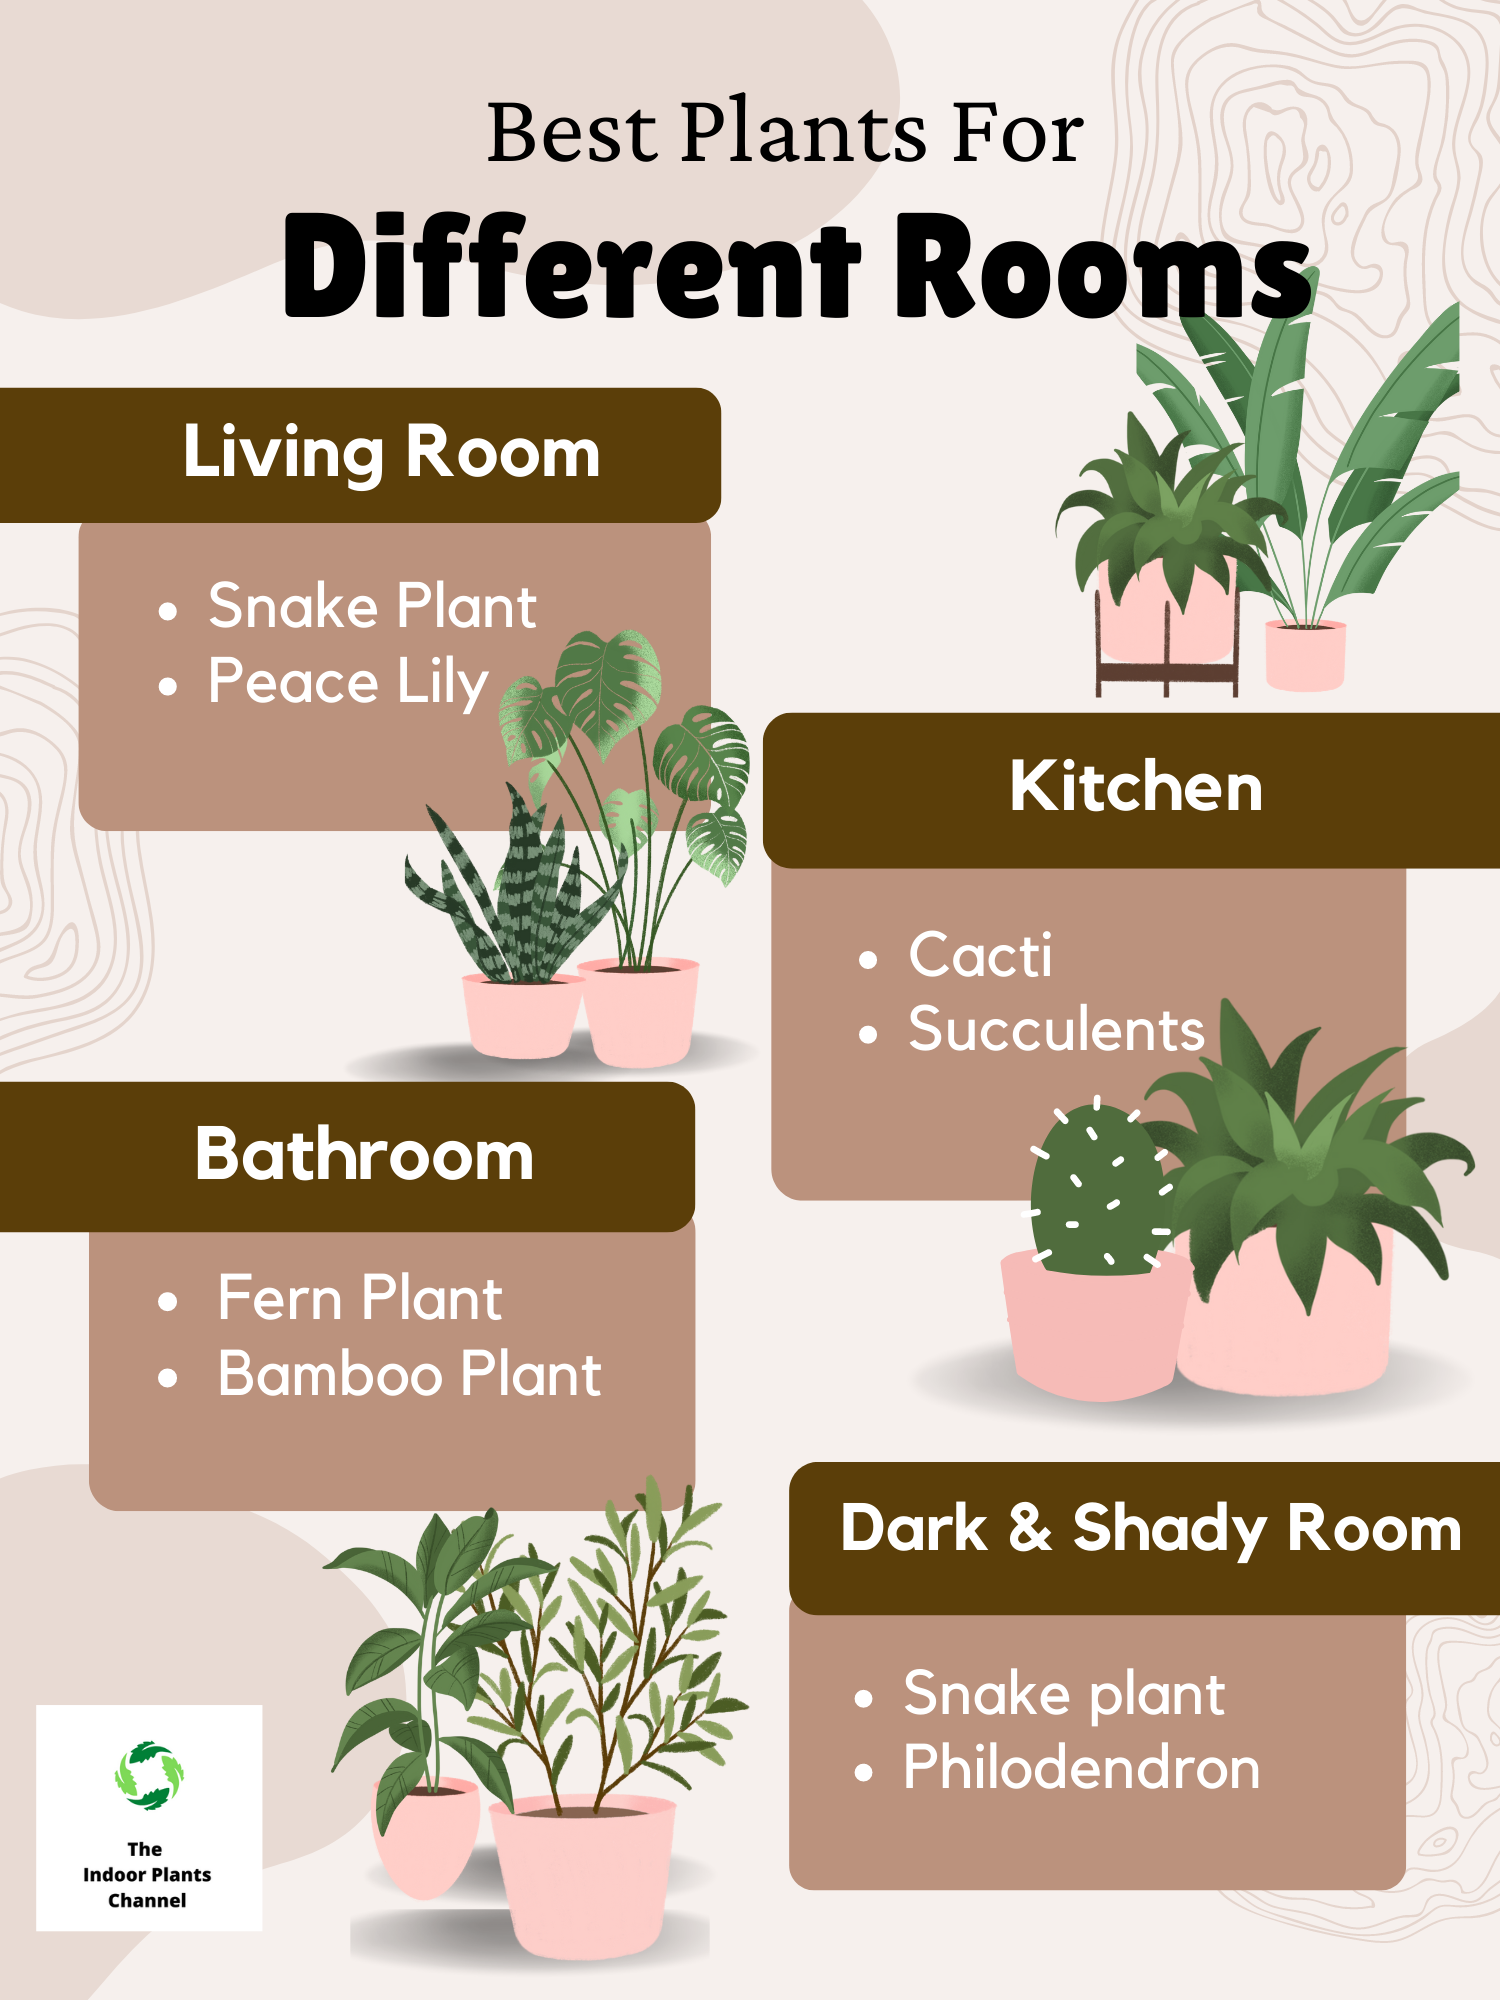 The Best Plants For Different Rooms